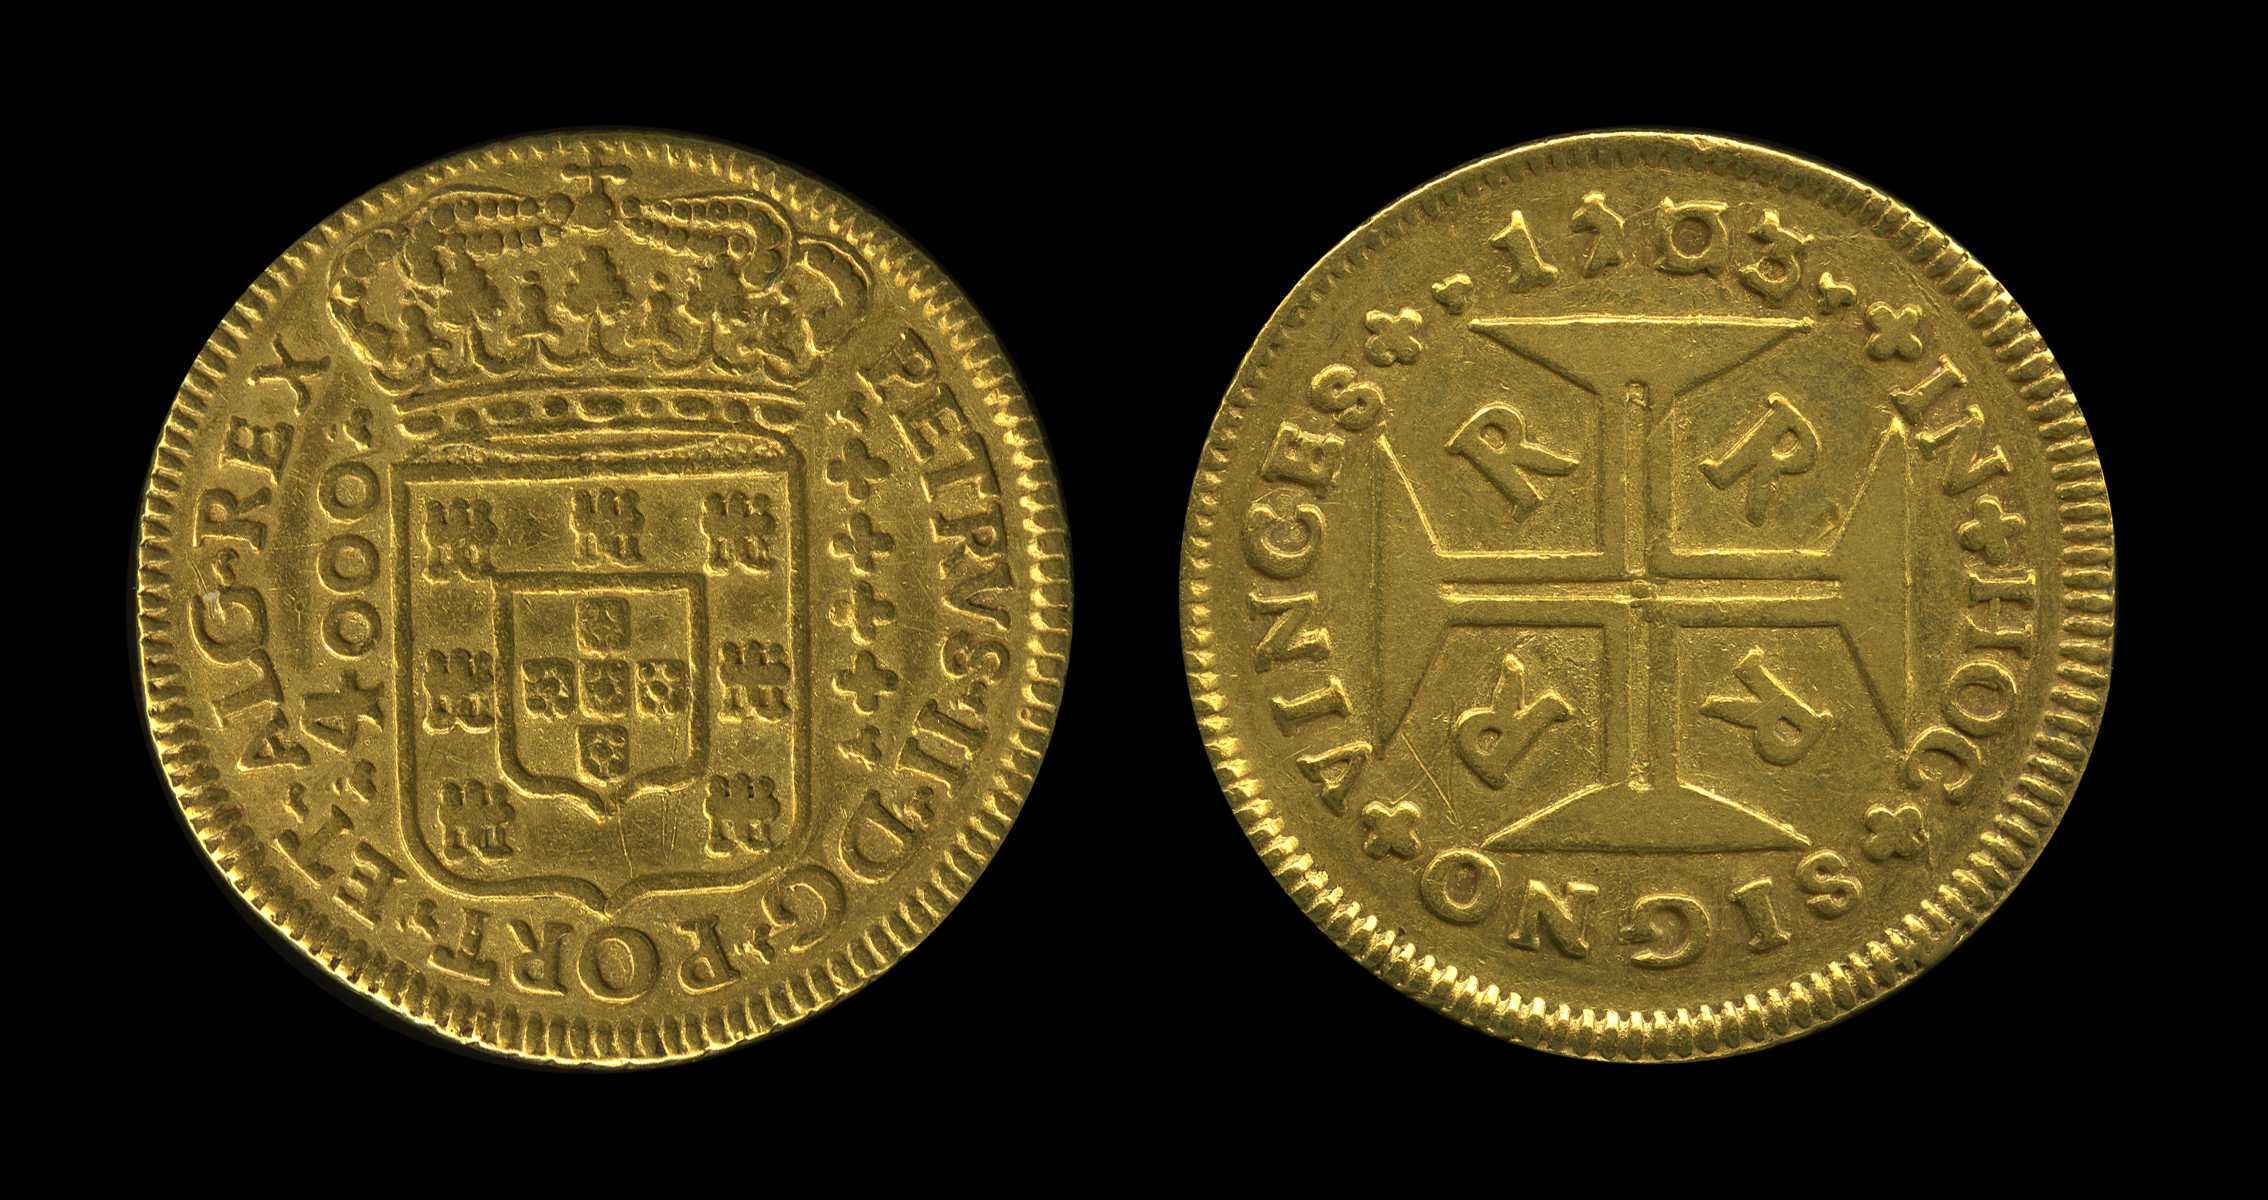 Photograph of gold coin (front and back)